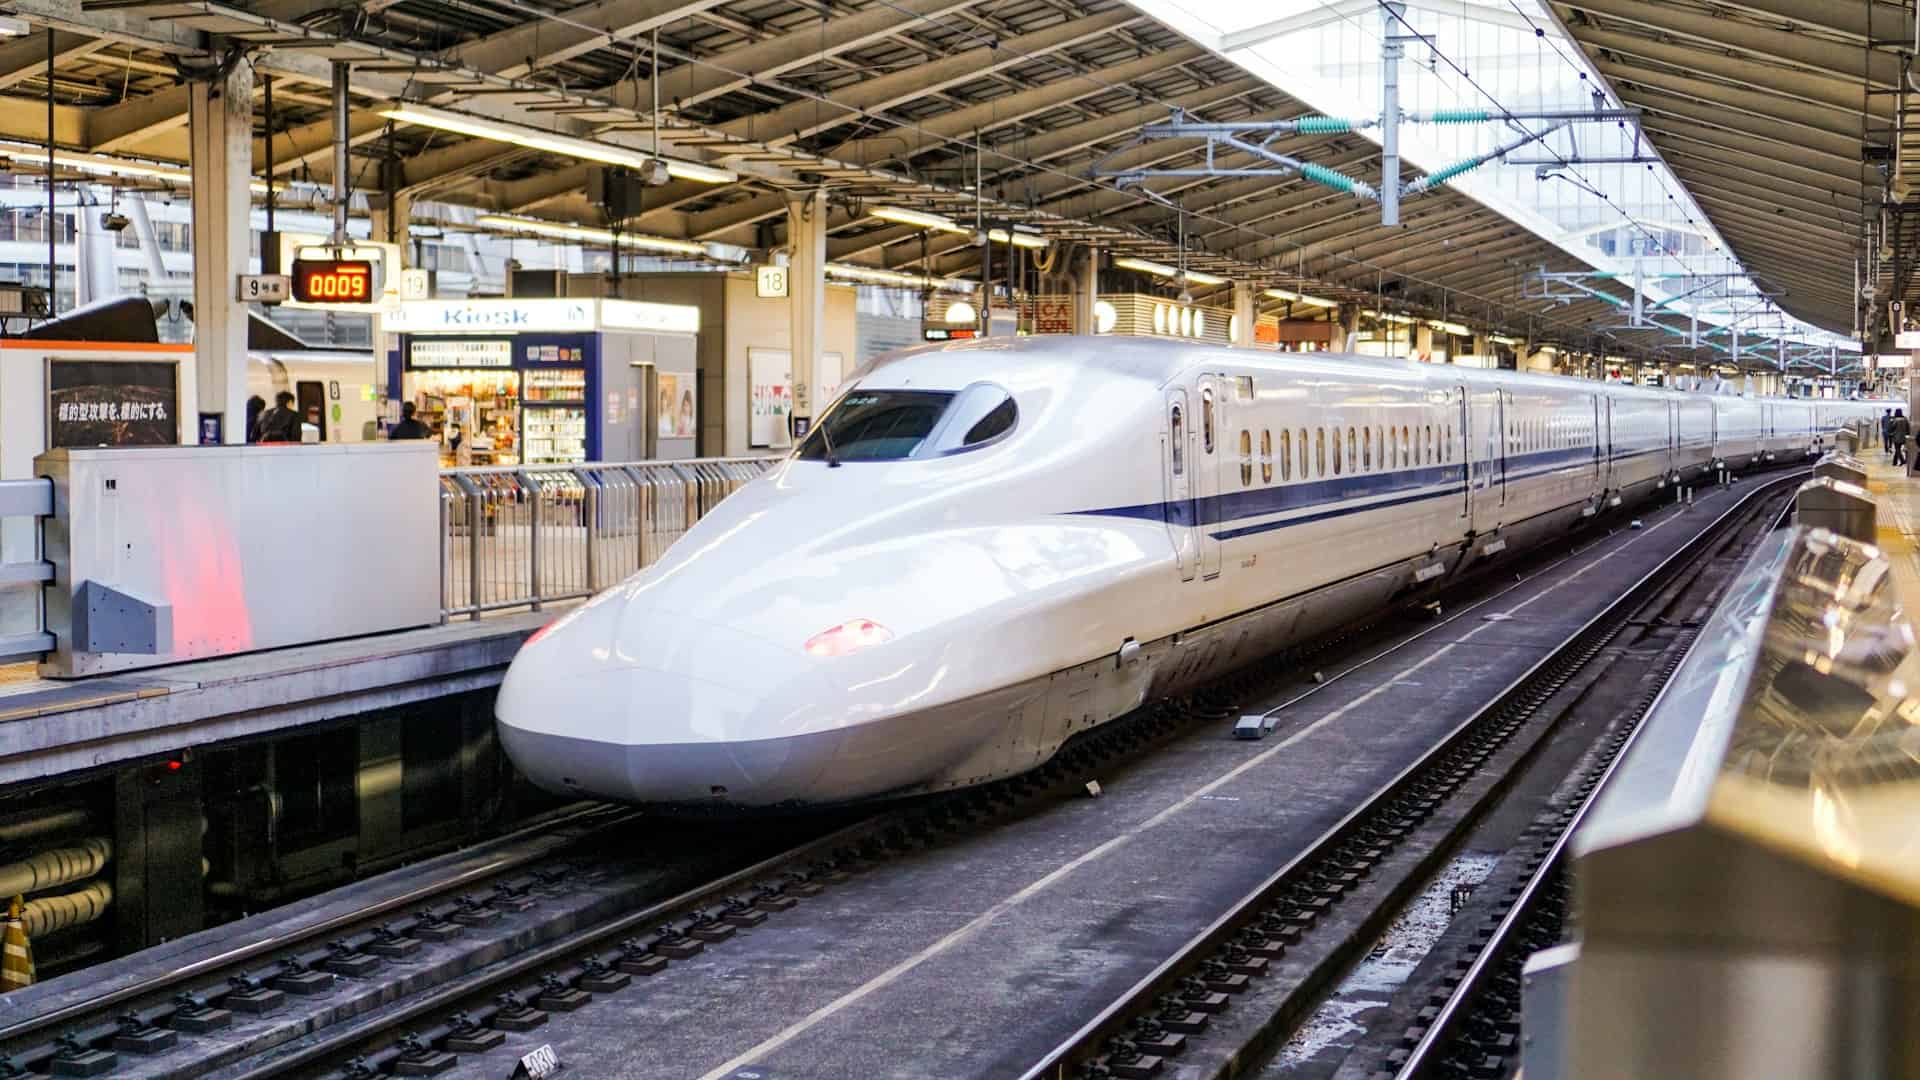 Read more about the article The Complete Guide to Experiencing the Shinkansen High-Speed Trains in Japan